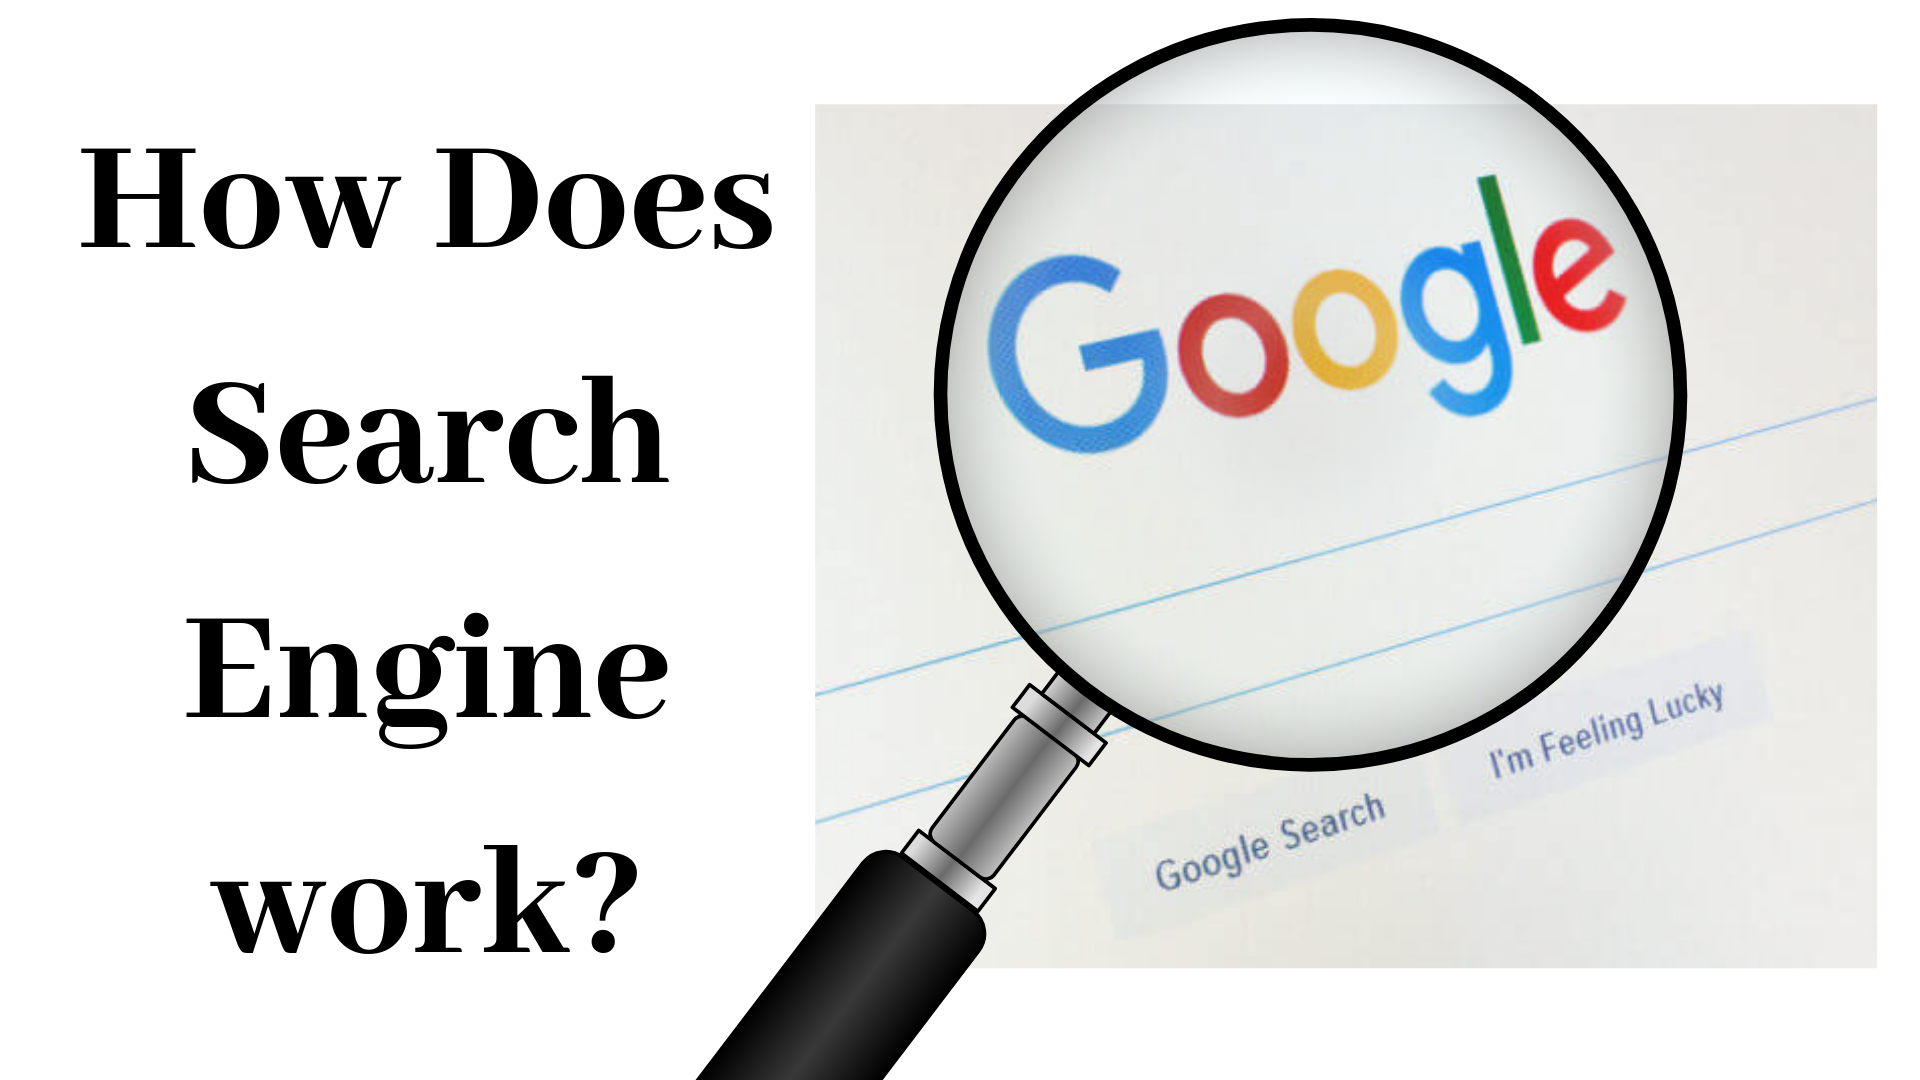 How Does Search Engine Work